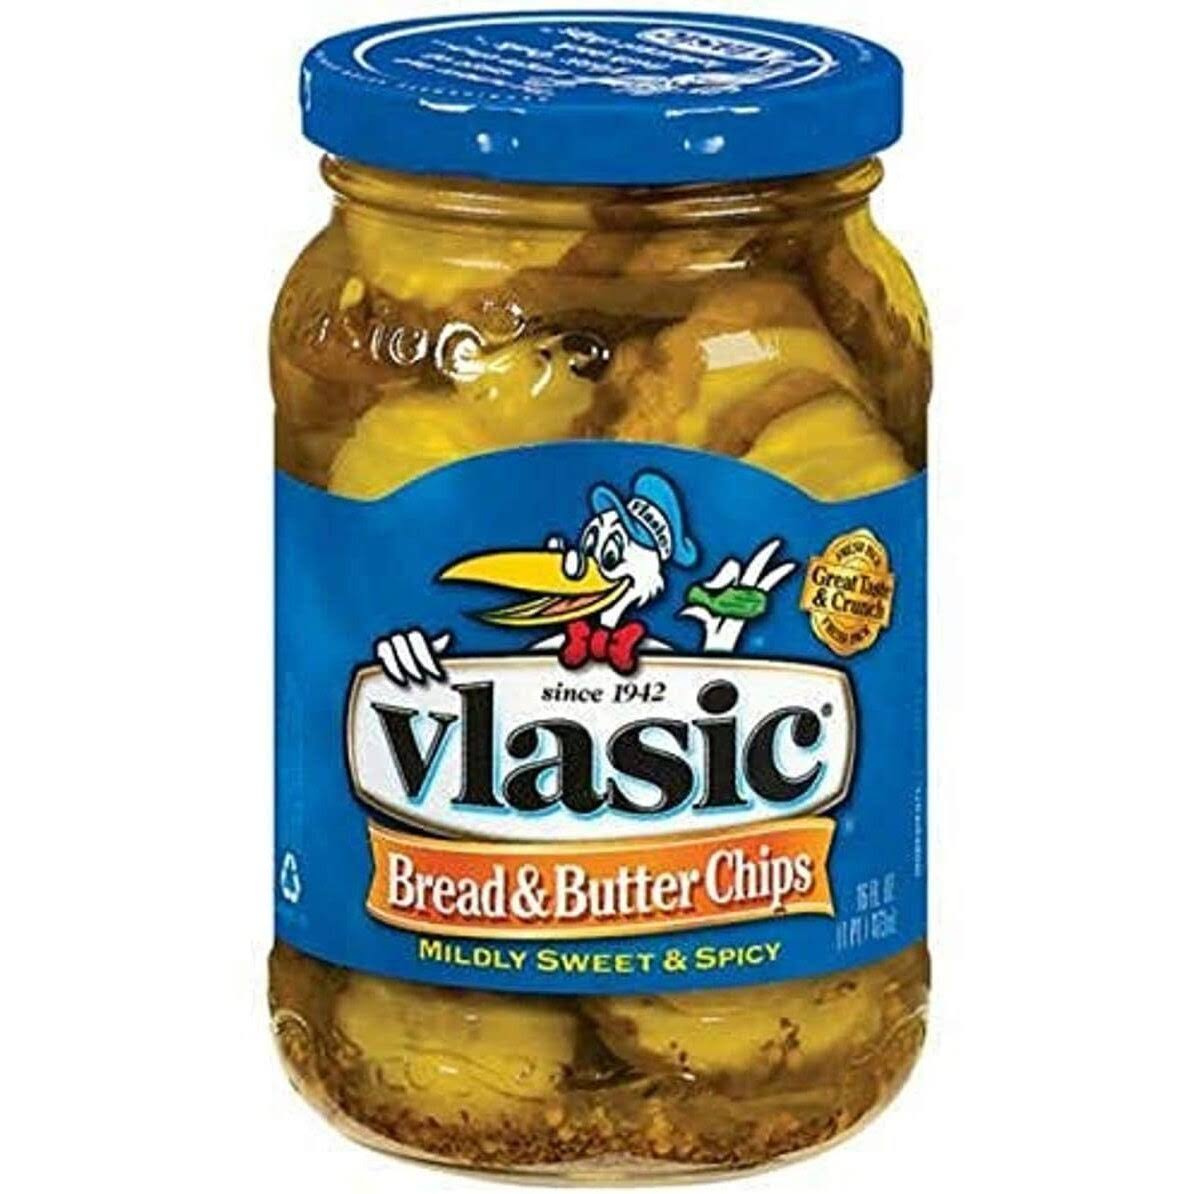 Vlasic Pickle Chips - Bread and Butter, 16oz